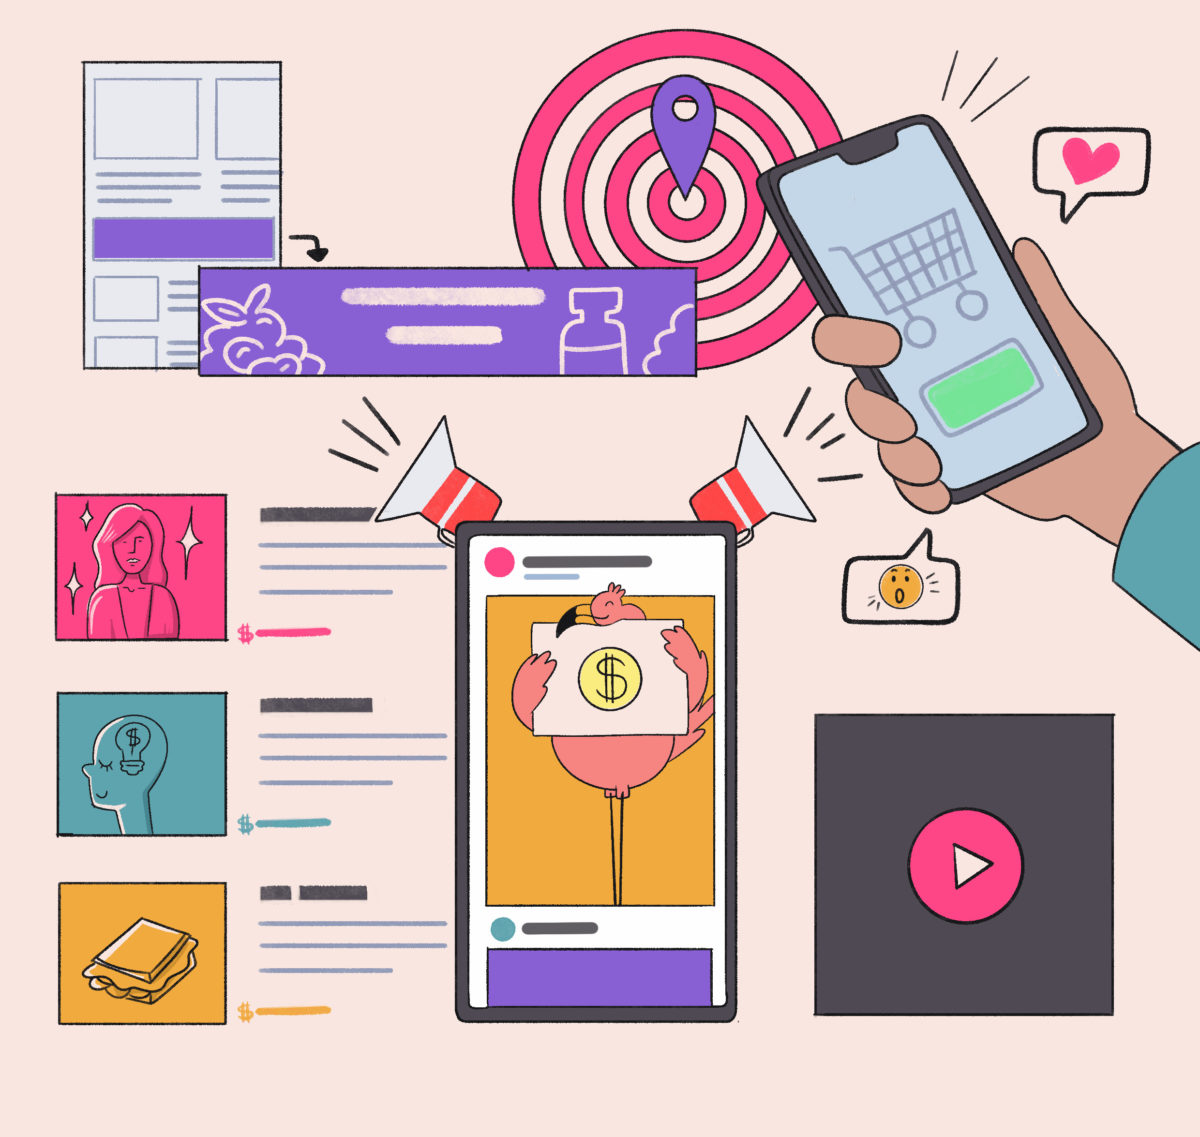 Illustration of a hand holding a smartphone with financial savings content, surrounded by various icons representing digital activities like online shopping, video streaming, and social media engagement.